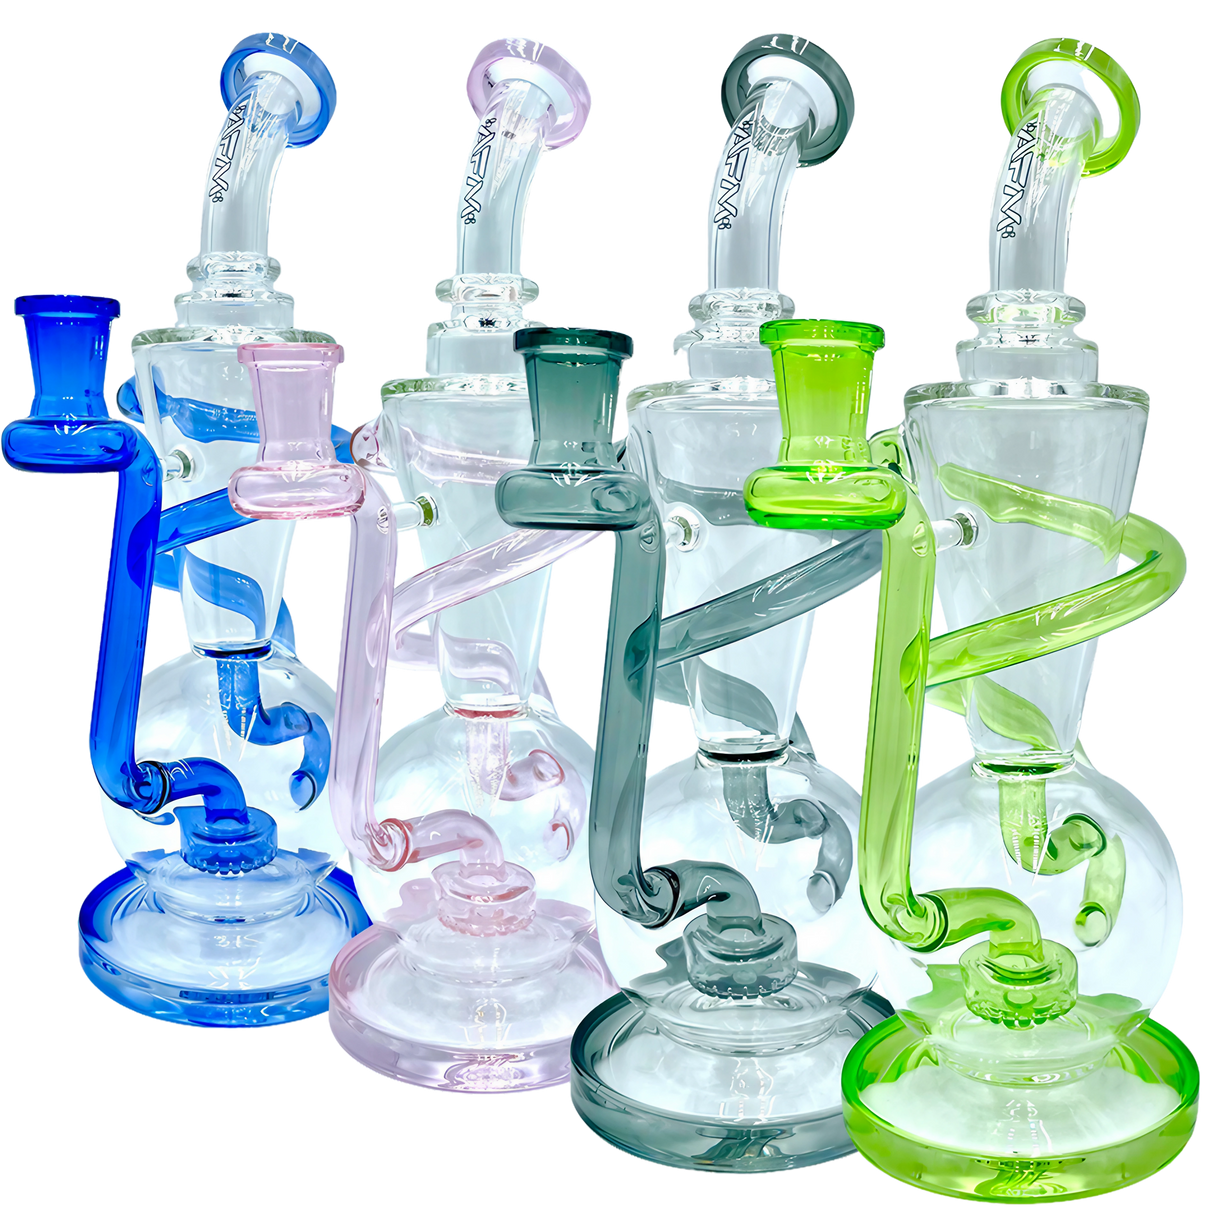 AFM The Swirly Wiry Recycler Dab Rigs in various colors with showerhead percolators